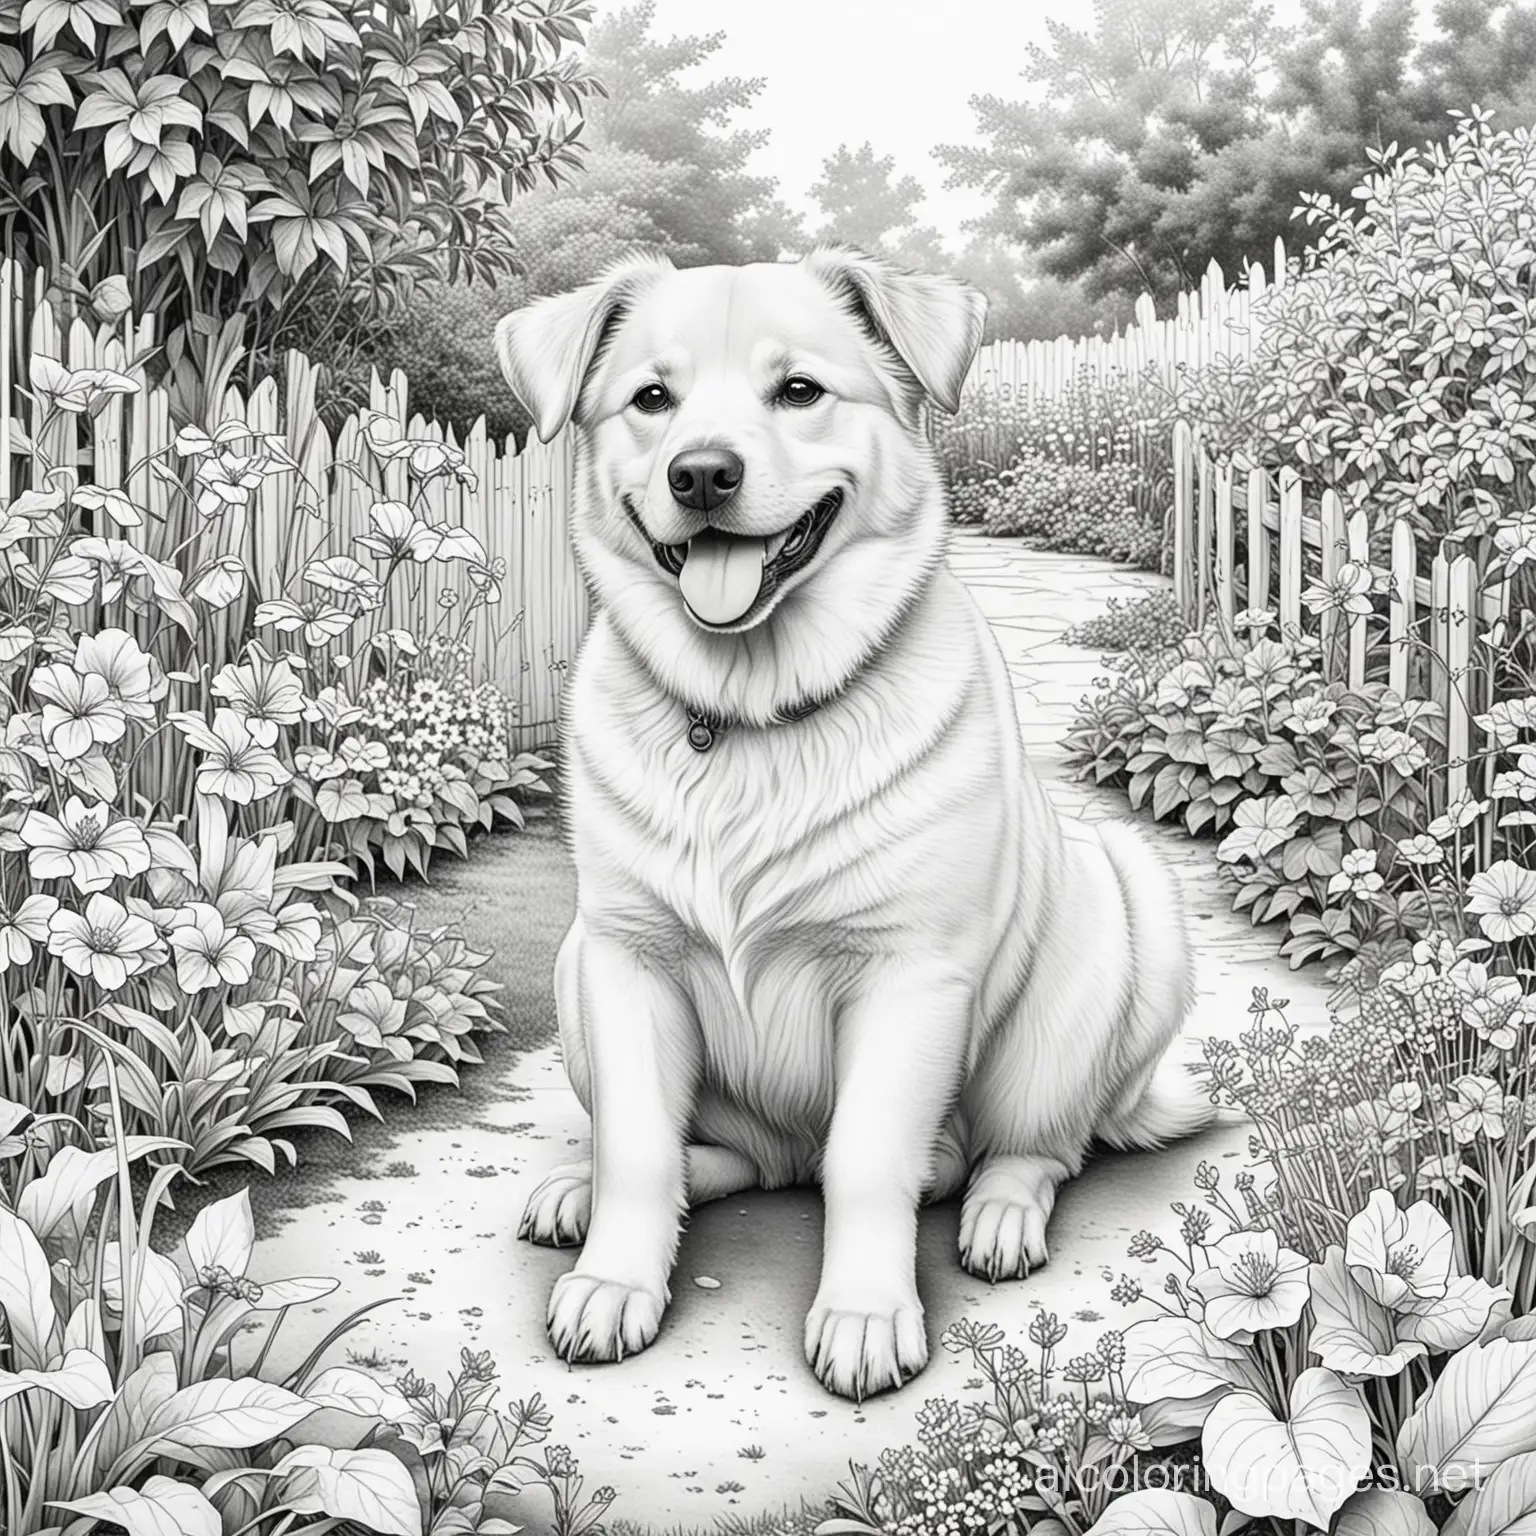 Cheerful-Dog-Coloring-Page-for-Kids-Garden-Fun-in-Black-and-White